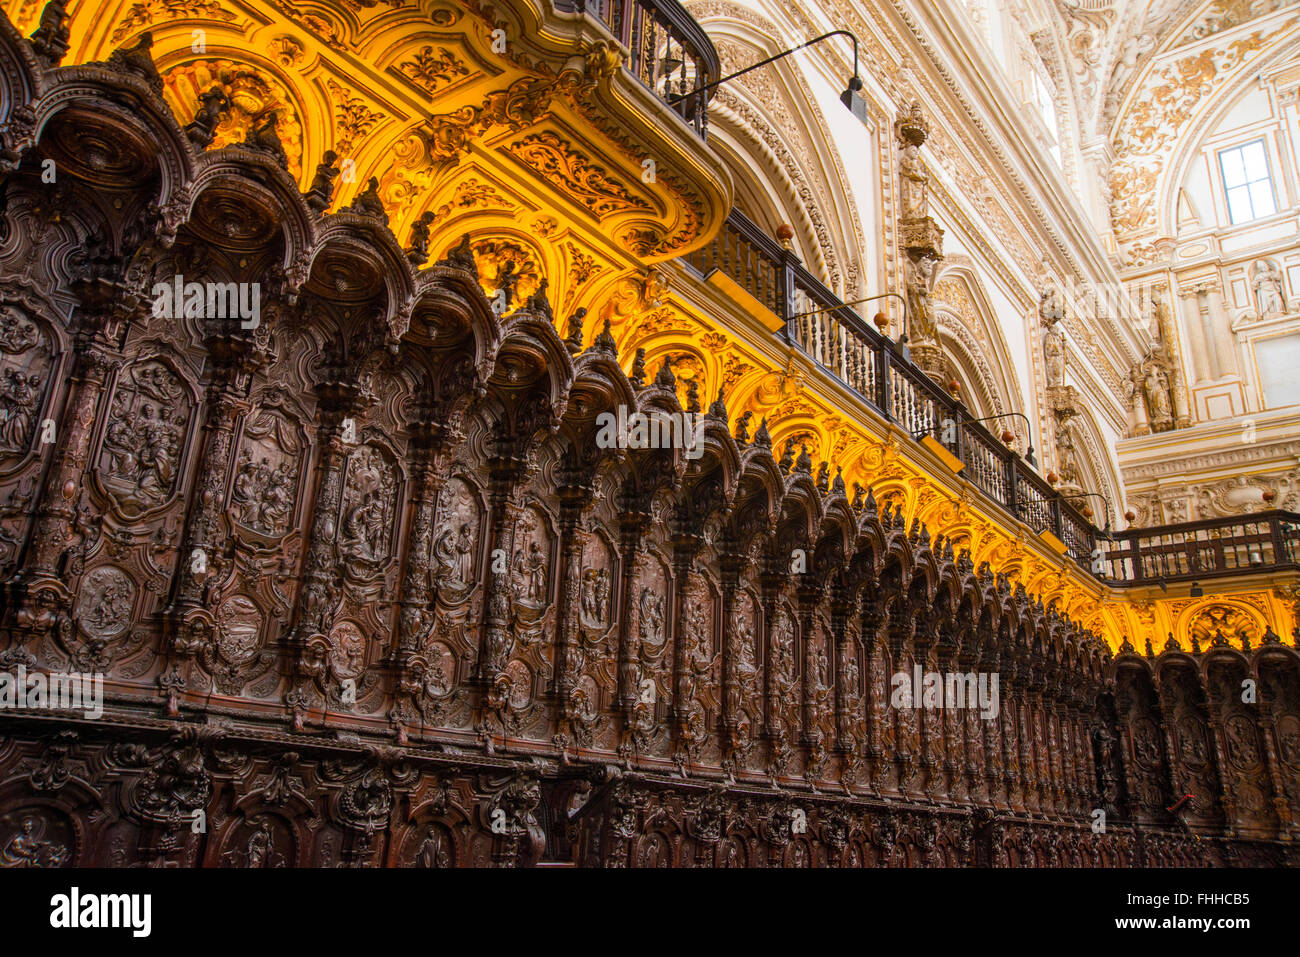 Choir stalls of the cathedral. Cordoba, Spain. Stock Photo